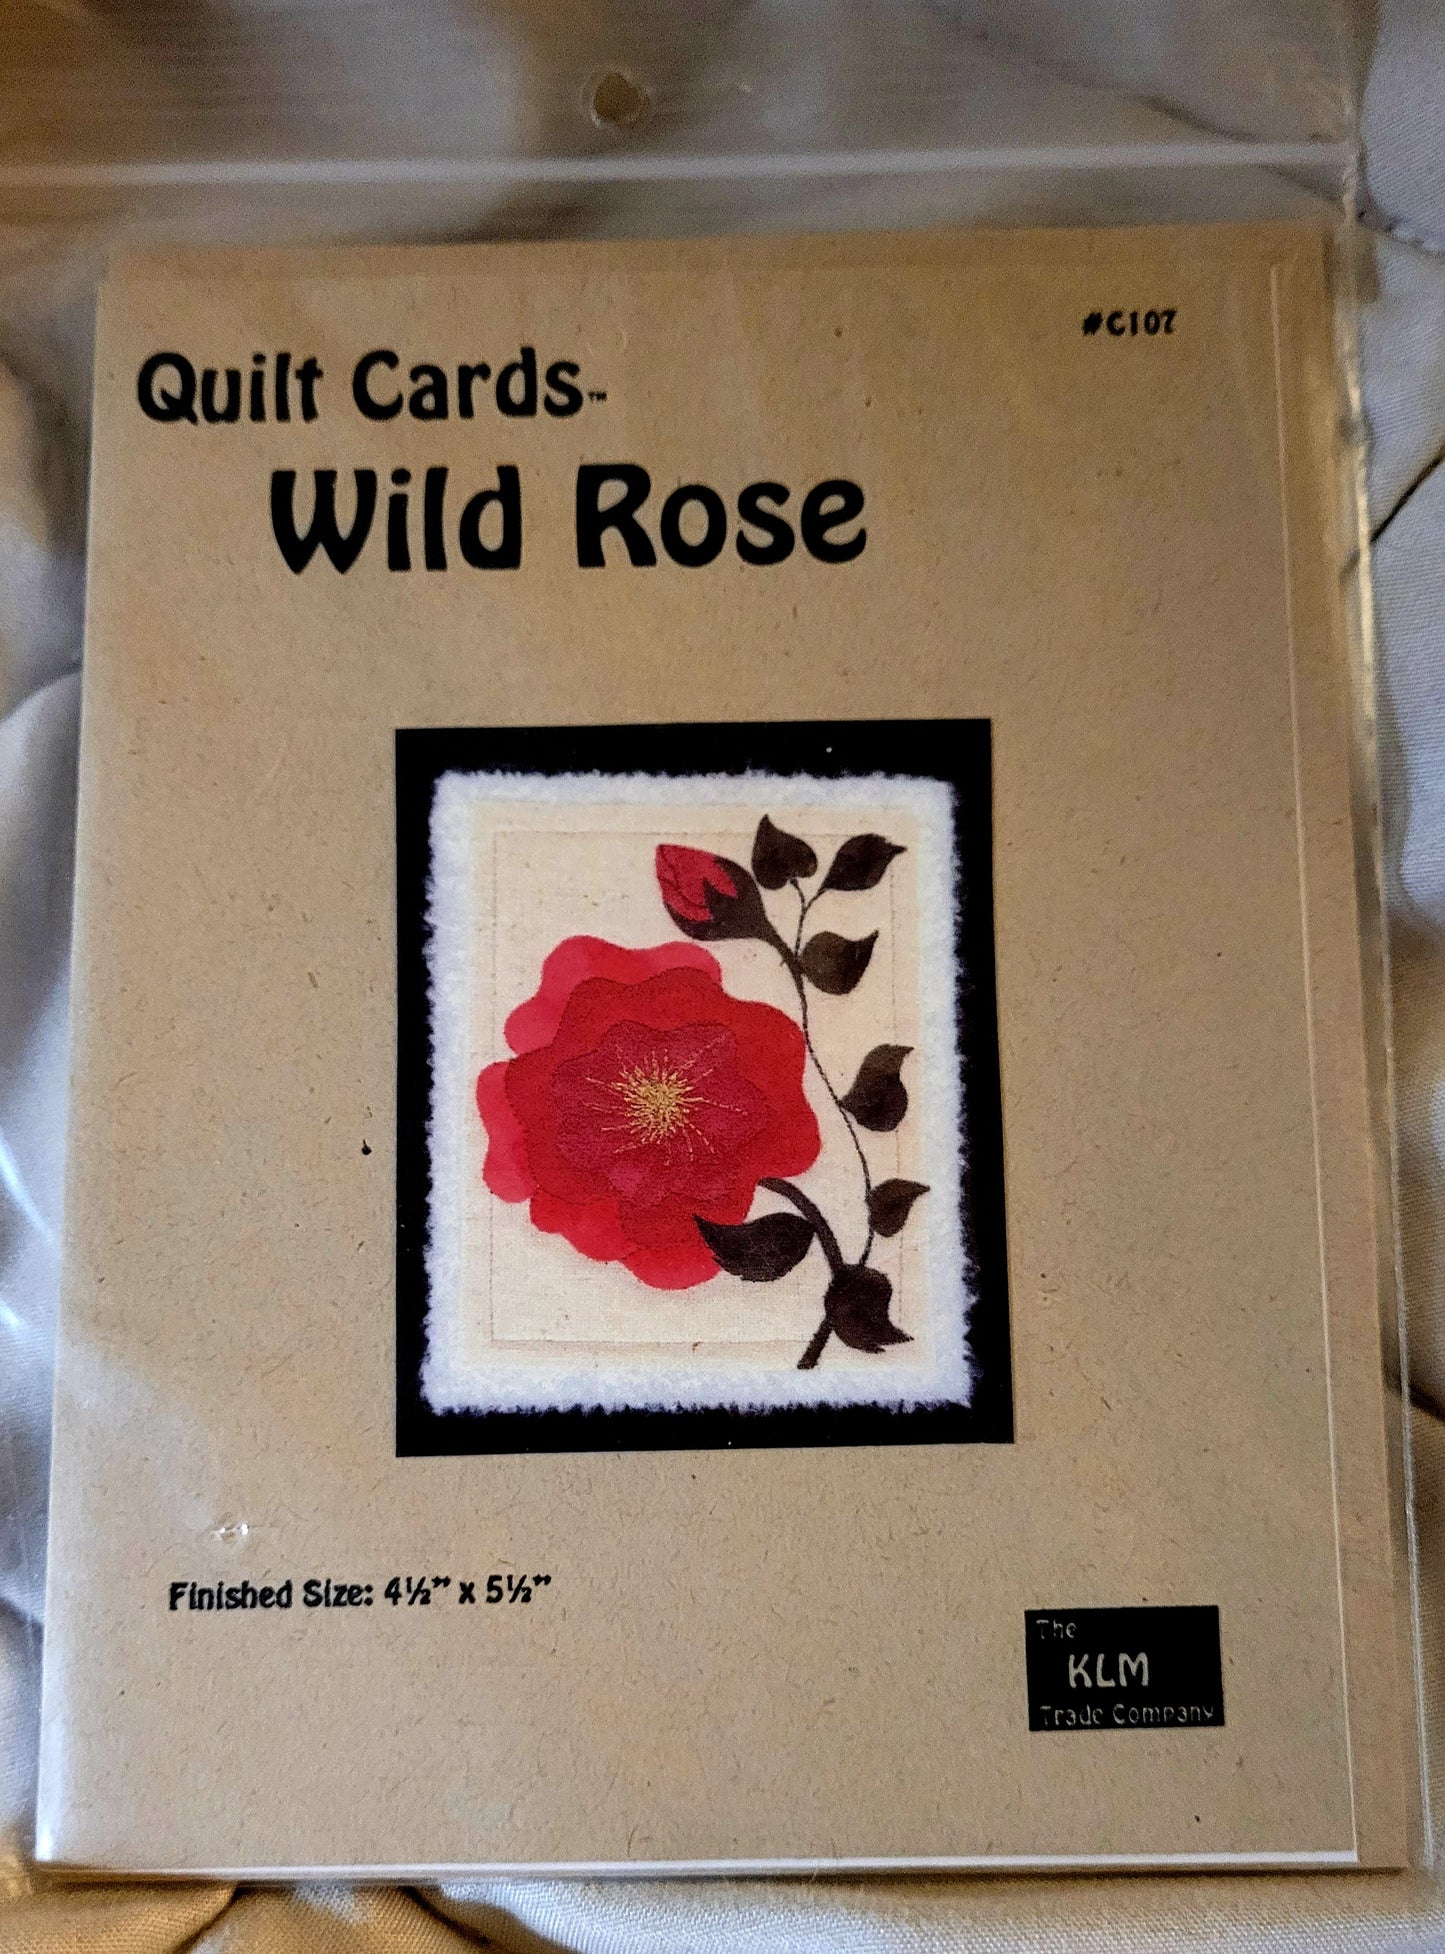 "Wild Rose" #C107 Quilt Cards by KLM Trading Co. *BRAND NEW